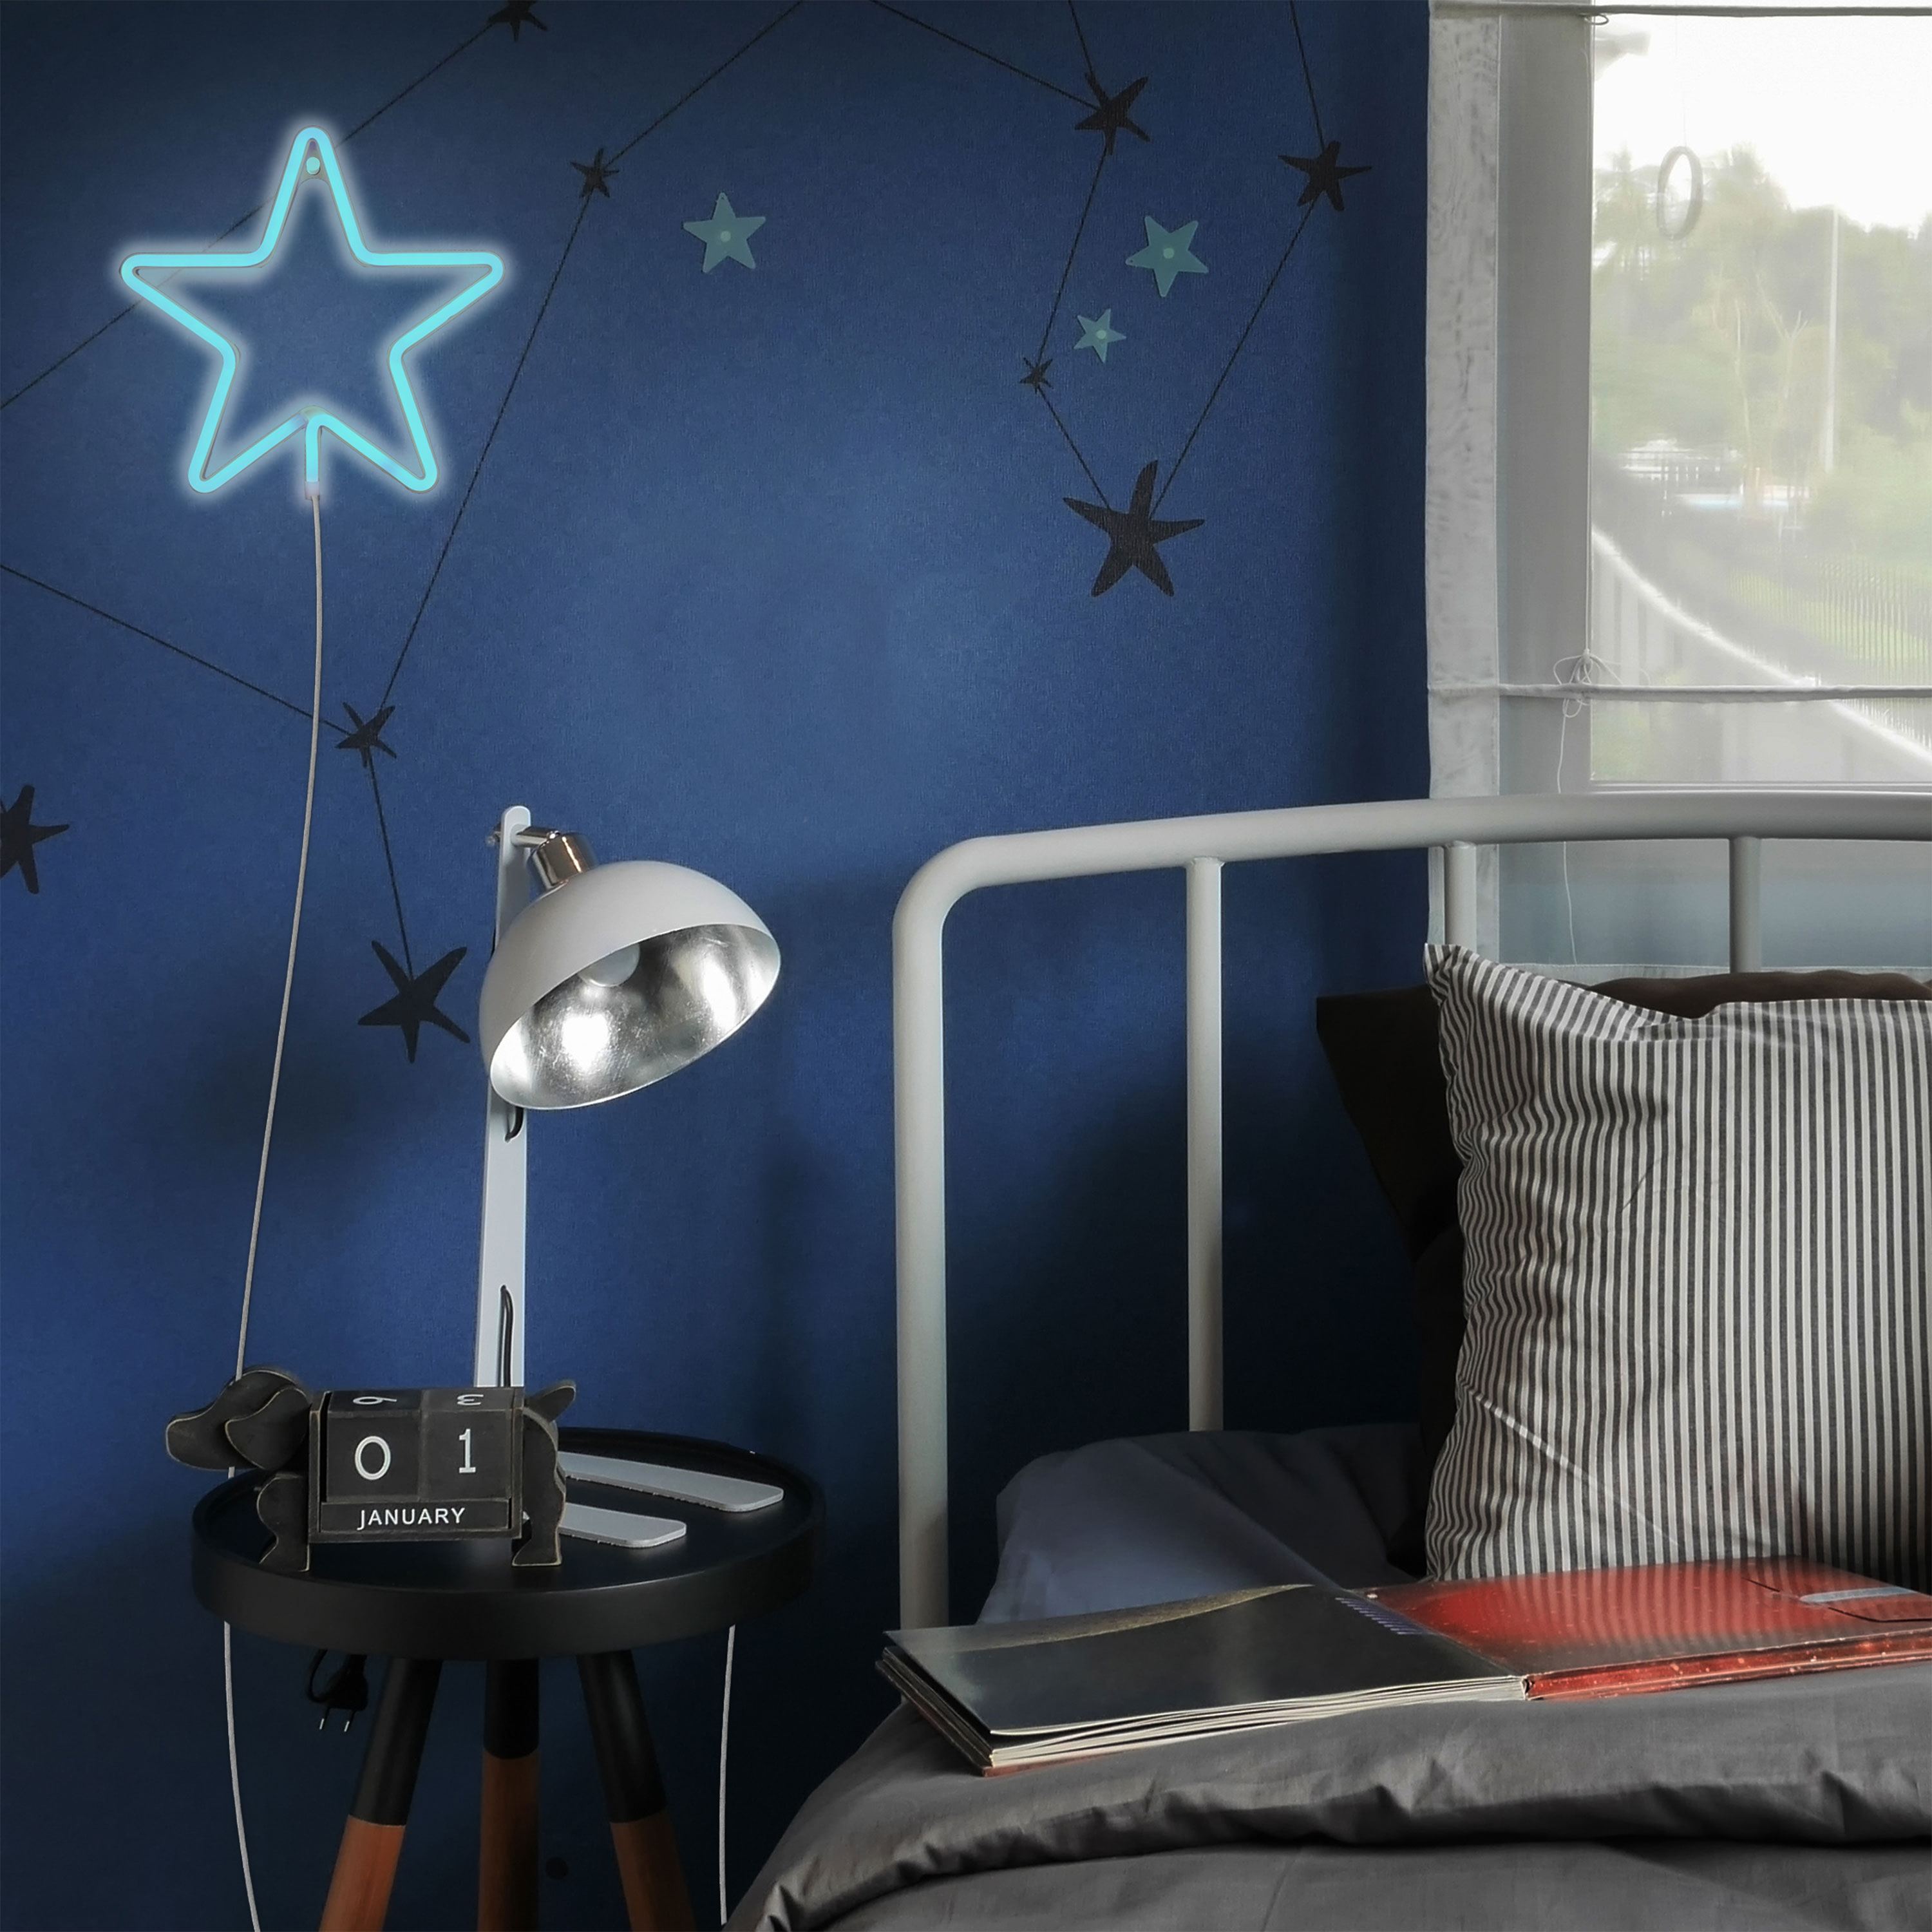 Atomi Neon LED Hanging Wall Art Star - Blue - image 5 of 6